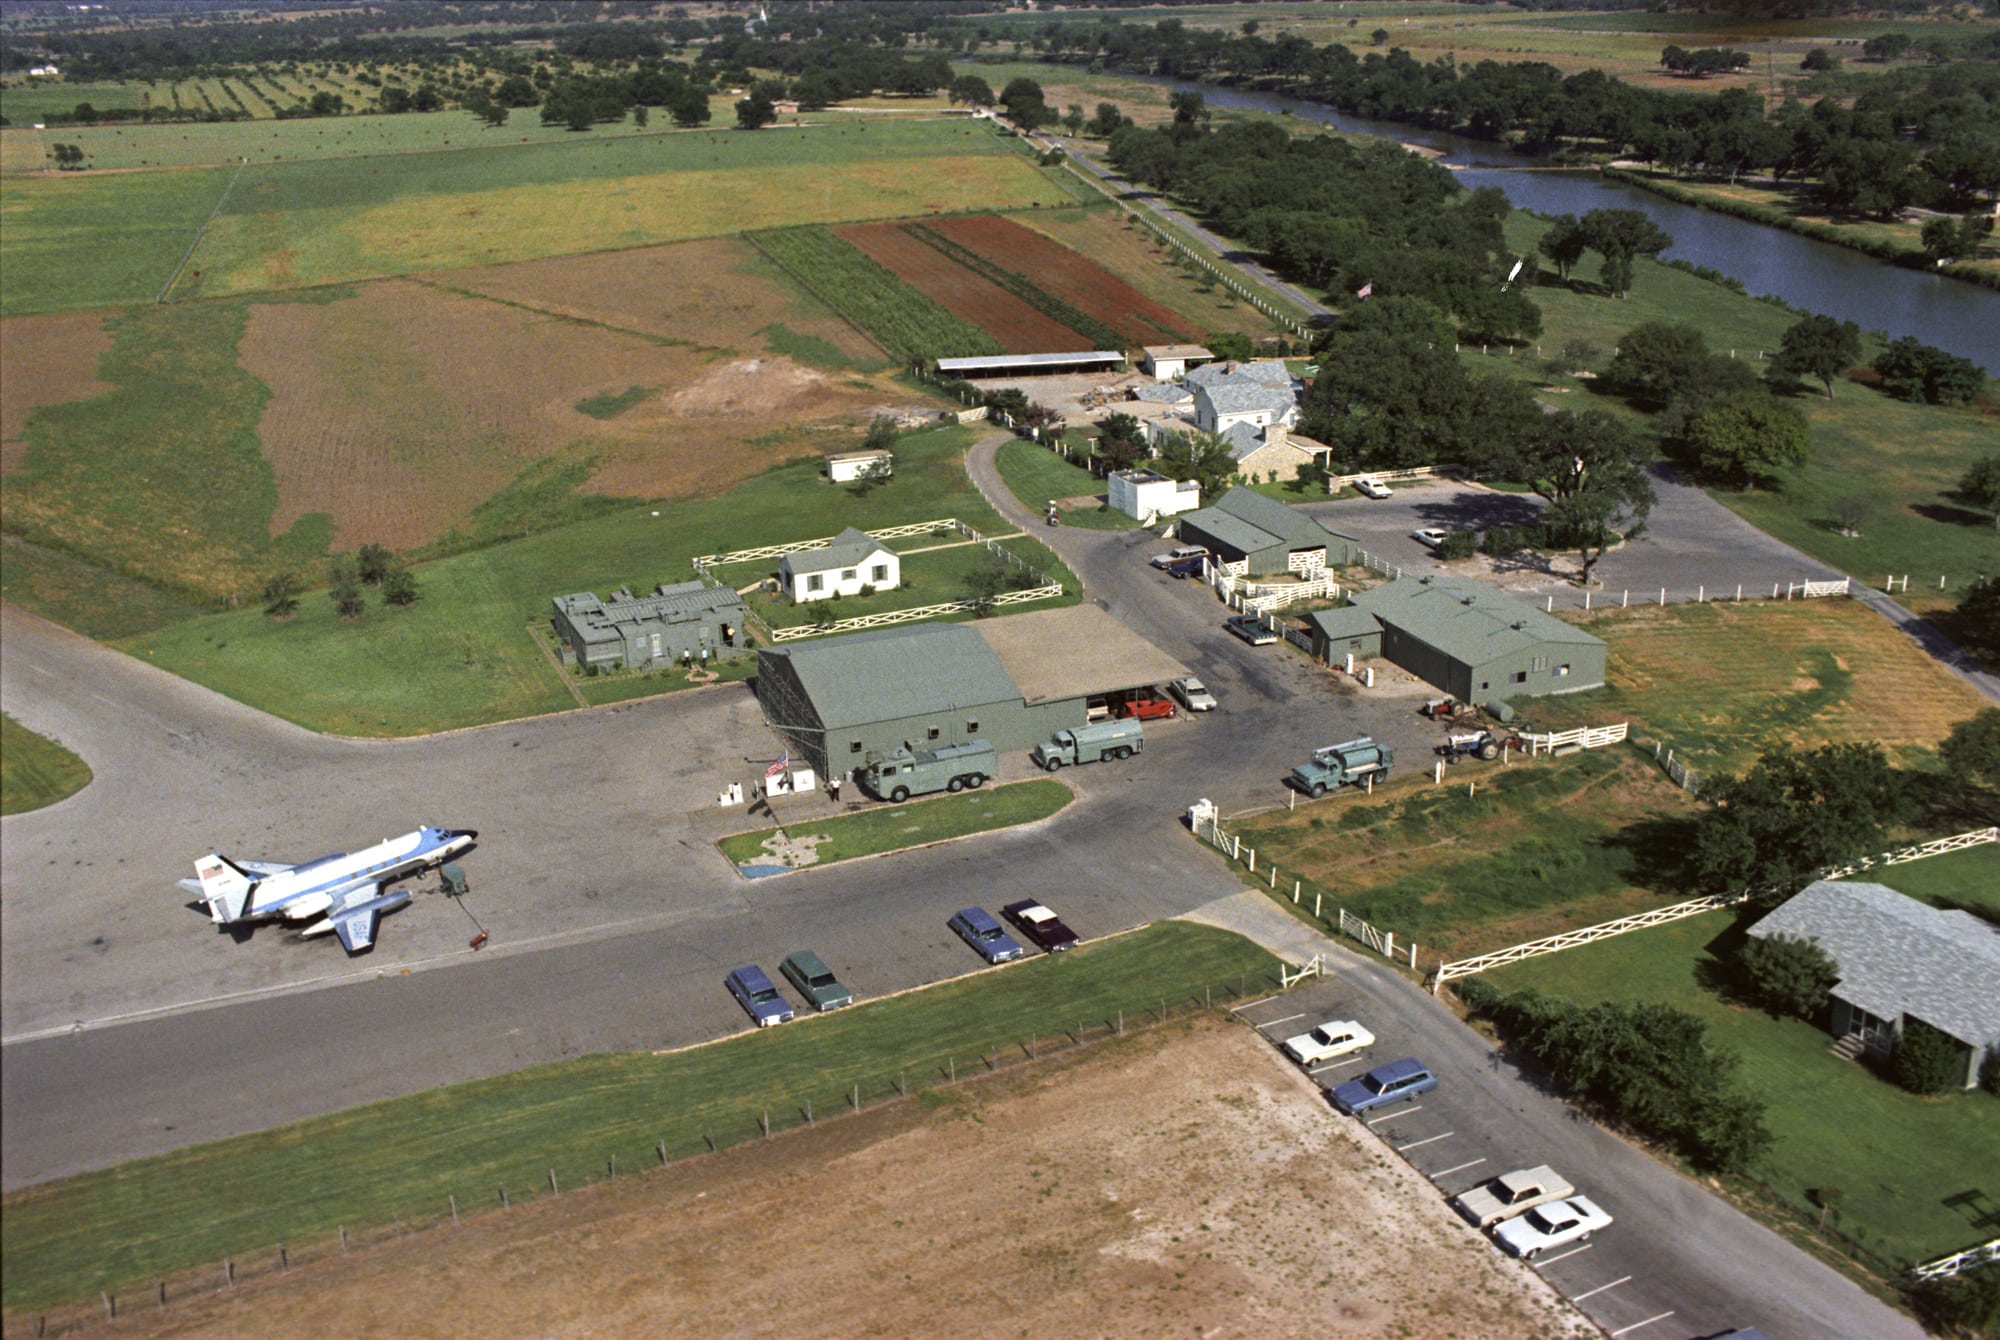 Aerial view of JetStar 61-2488 on June 24, 1967 at President Johnson’s  ranch in central Texas, about 50 miles west of Austin. (LBJ Library photo.)